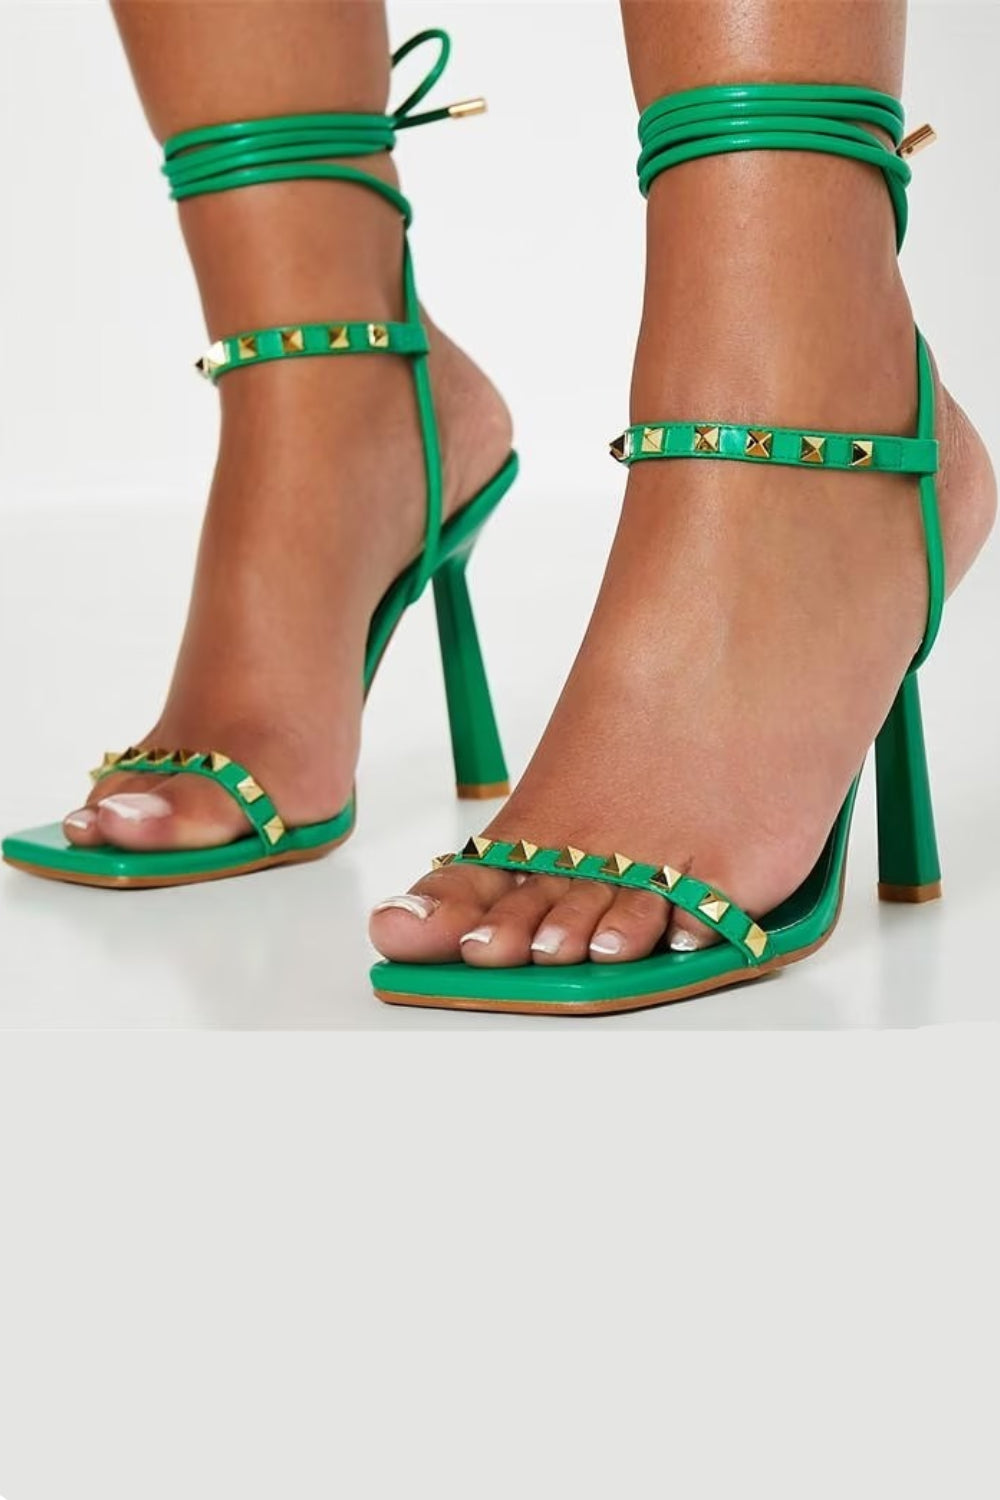 Green PU Studded High Heel Sandals With Square Toe & Tie Leg